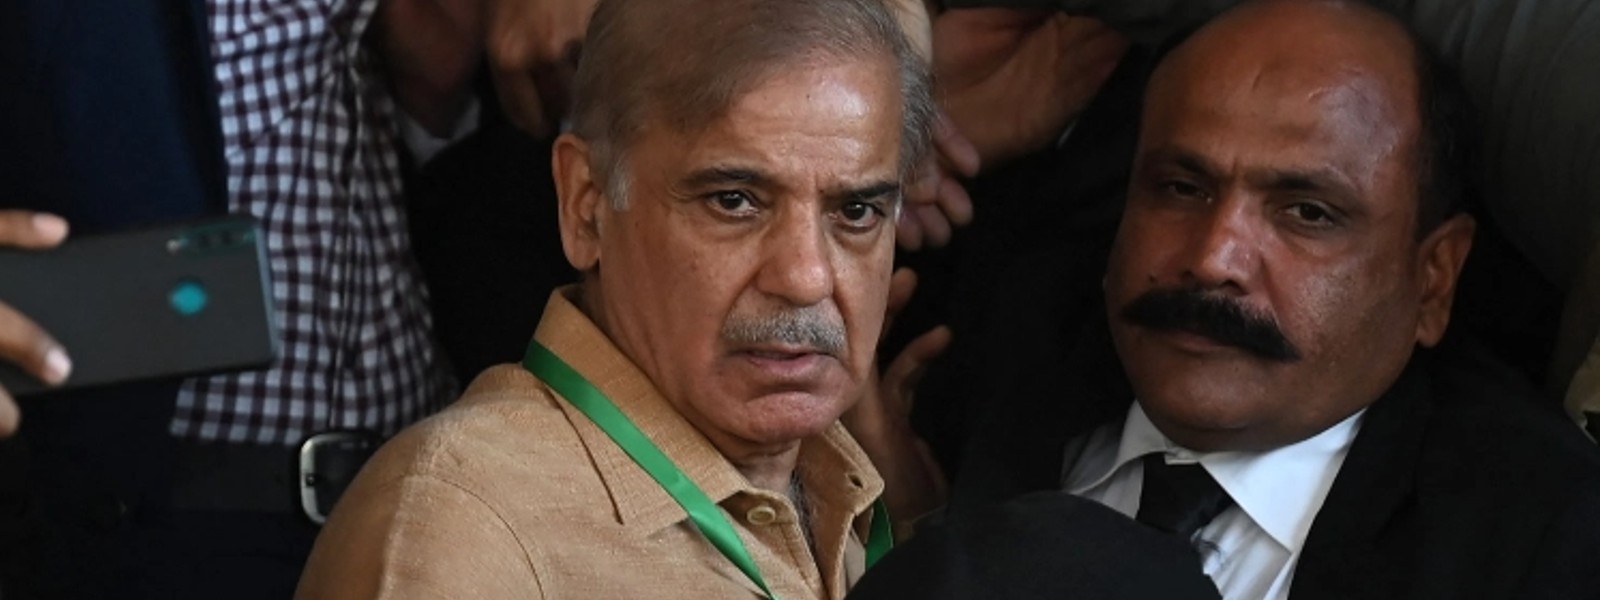 Shehbaz Sharif Elected As New Pakistan Prime Minister